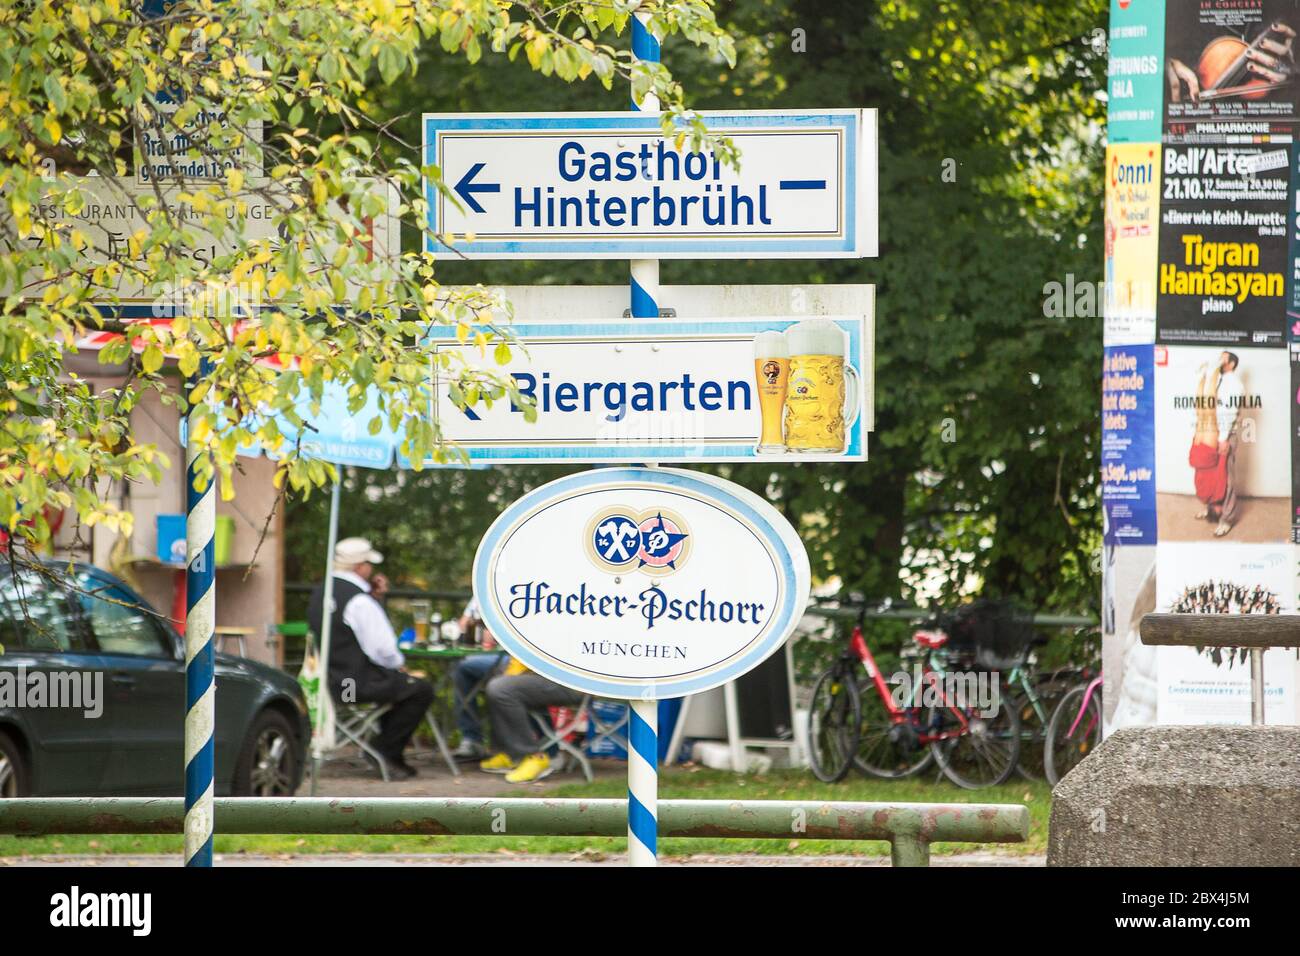 Munich,Germany-September 24,2017: Signs on a street show the way to a nearby beergarten in Munich Stock Photo